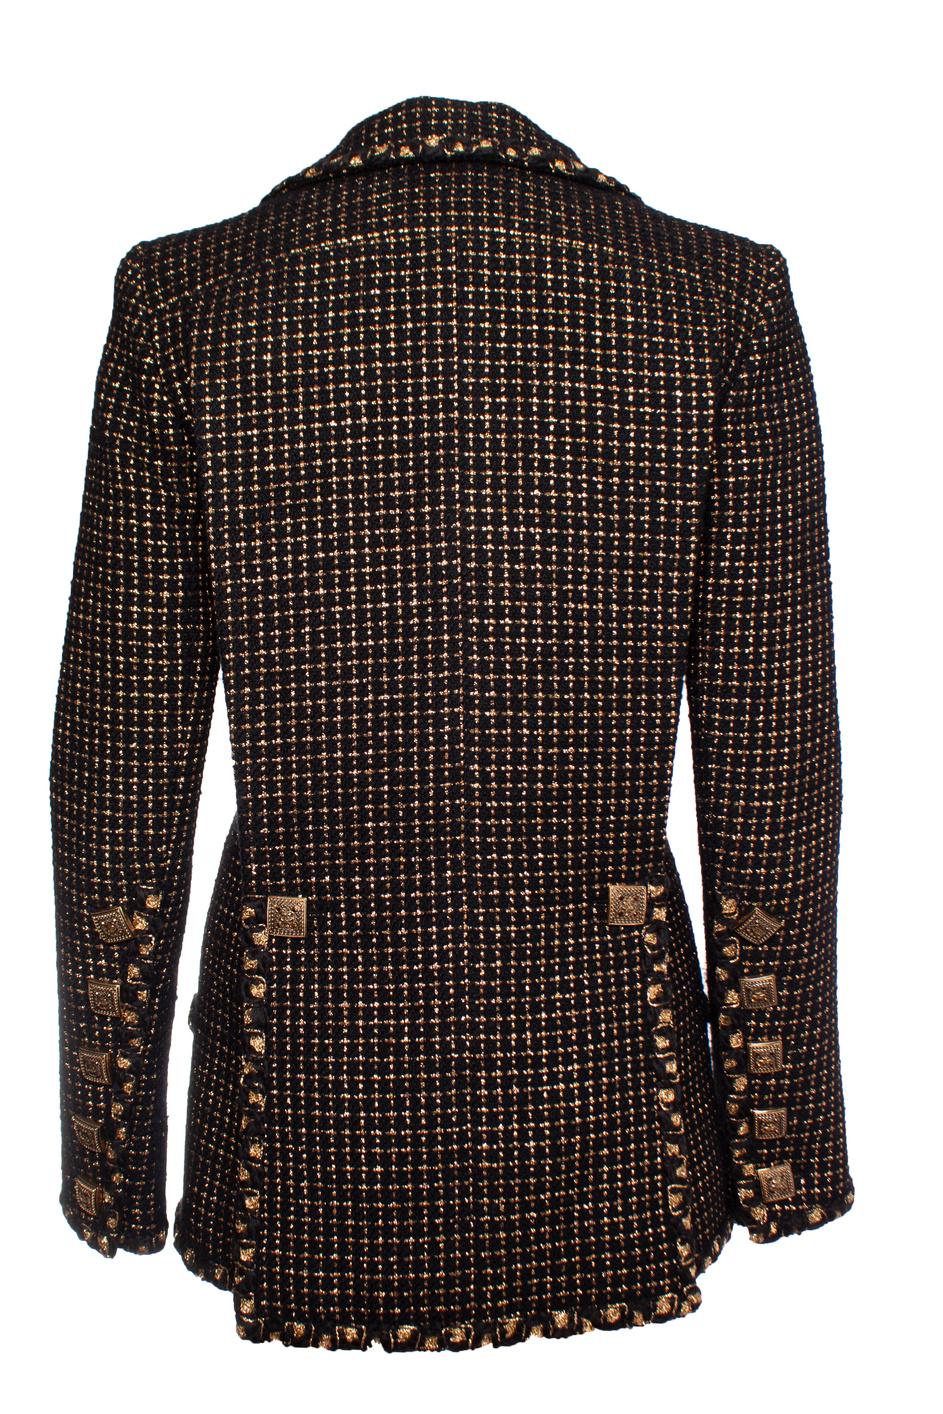 Chanel New Icon Paris / Byzance Black Tweed Jacket For Sale 8